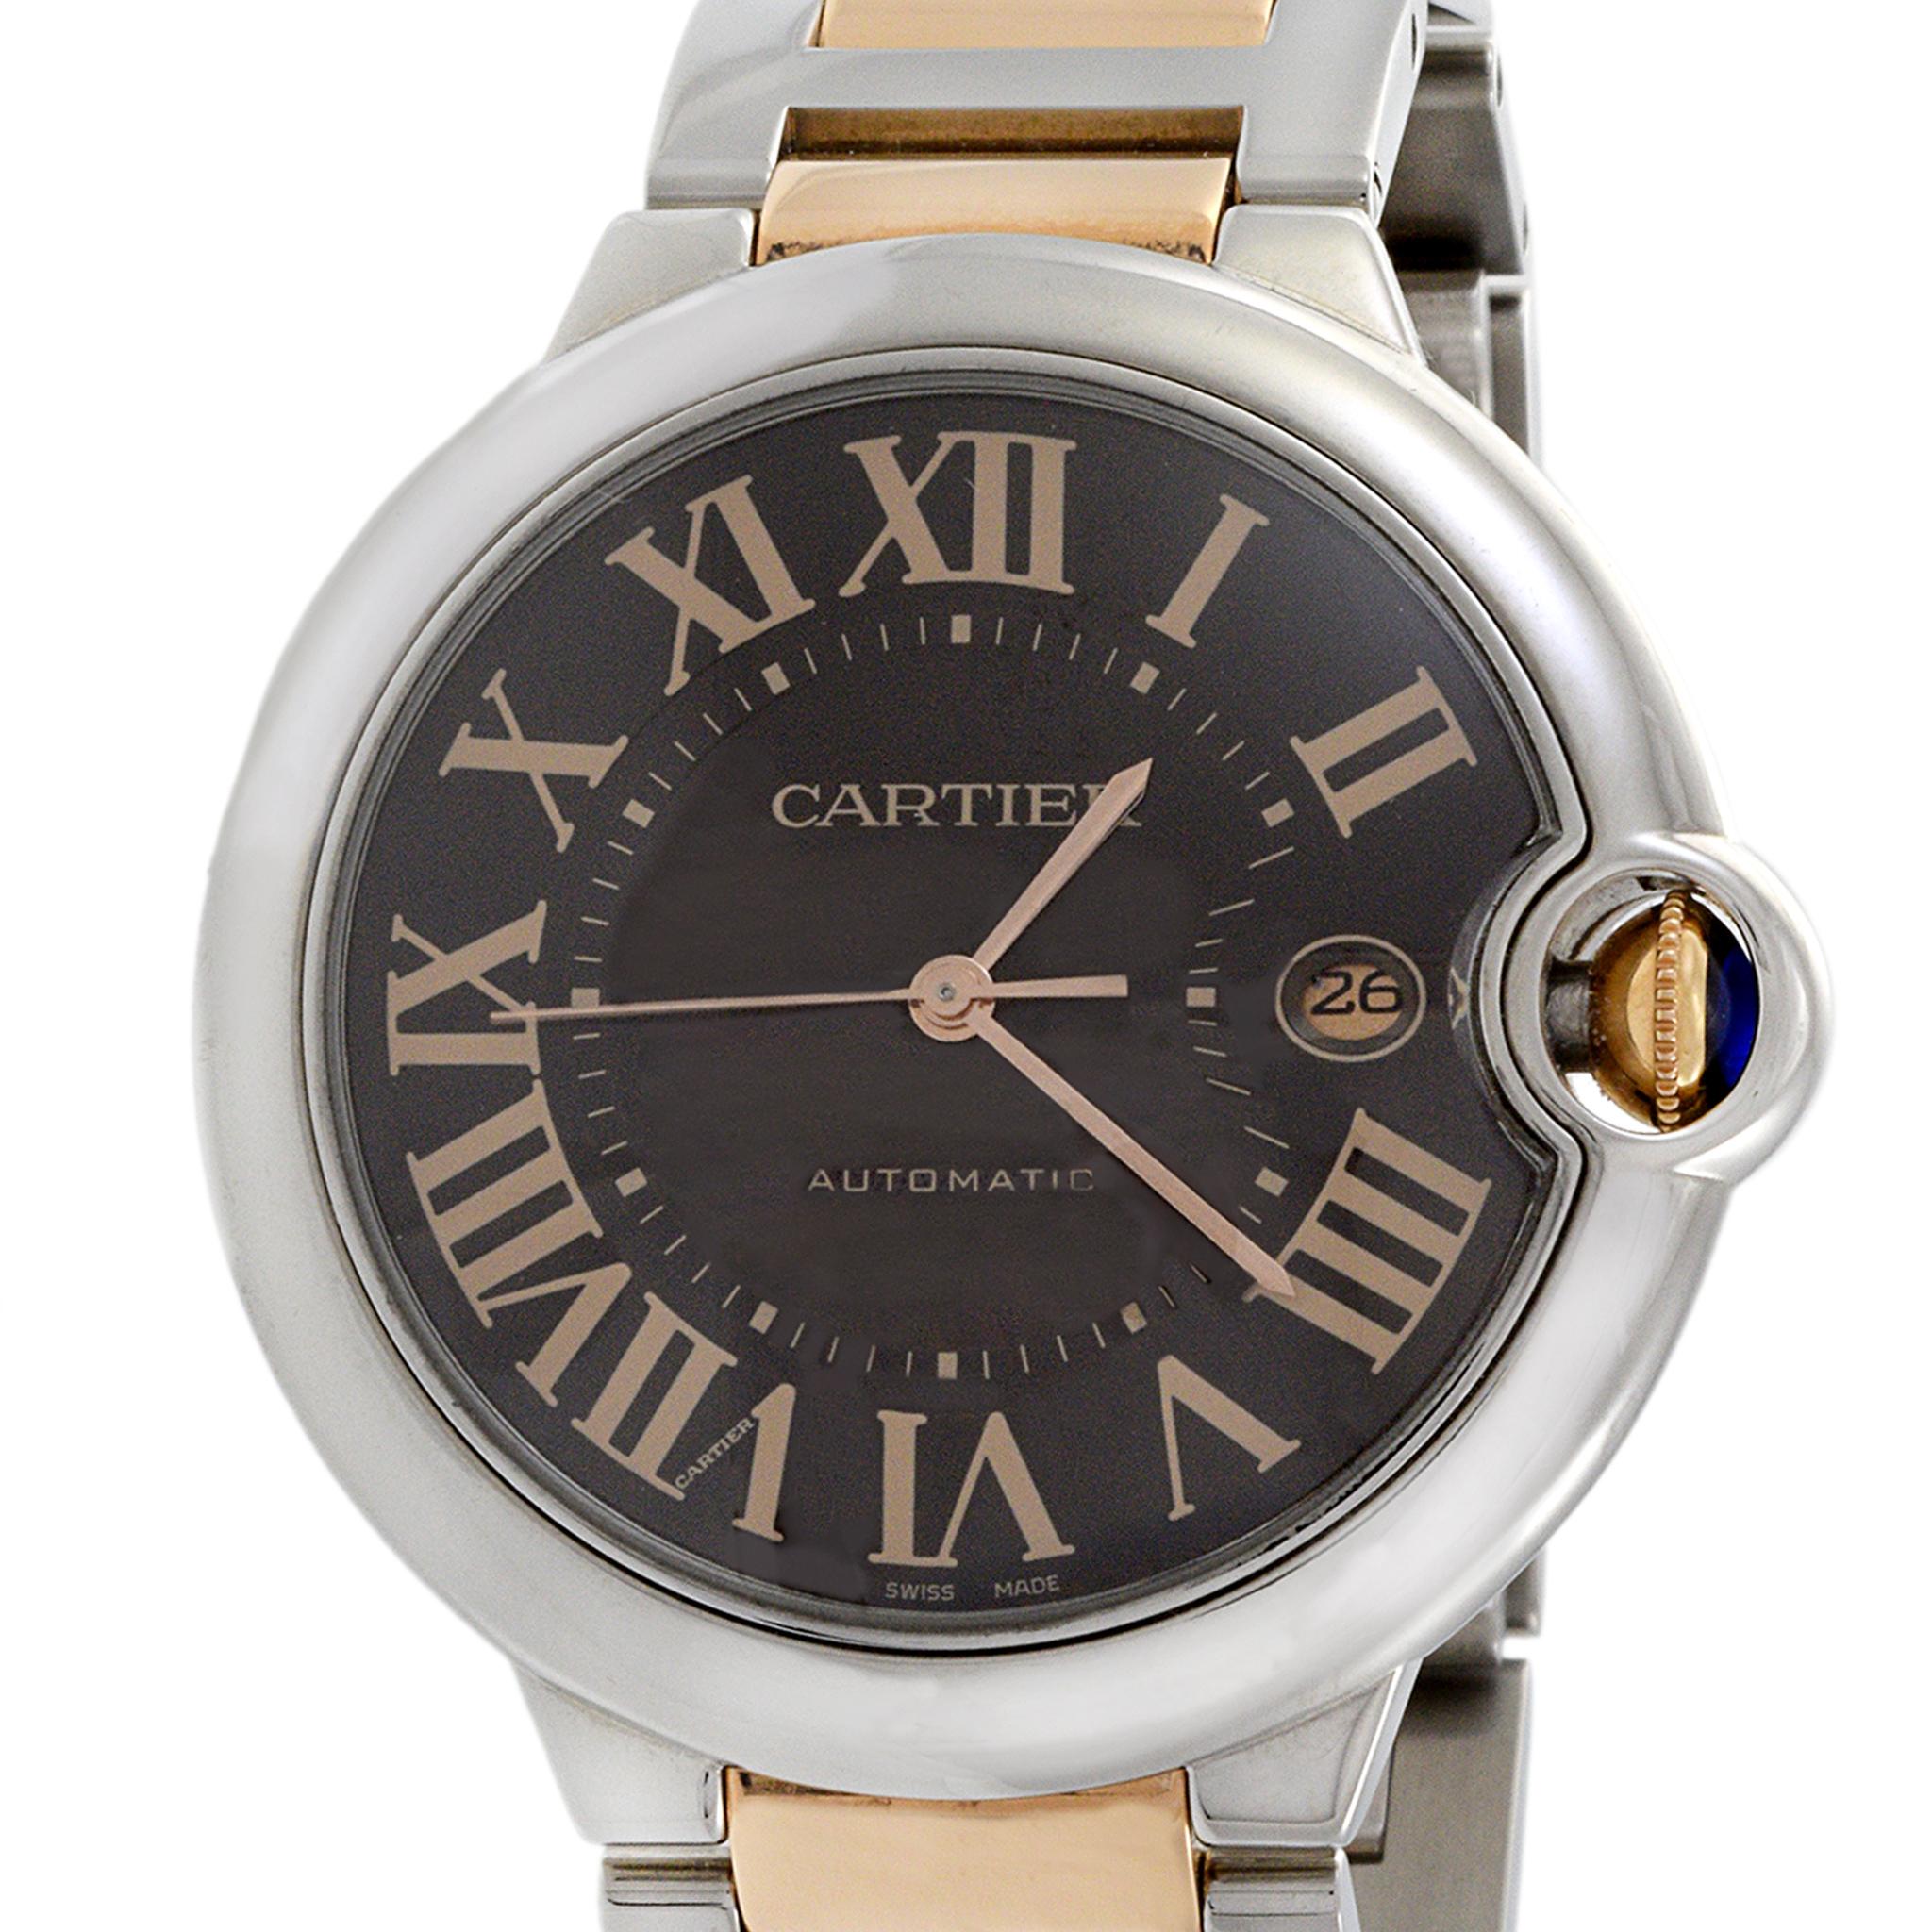 Cartier Ballon Bleu Steel Rose Gold Brown Dial Watch (Model W6920032). This exquisite timepiece seamlessly combines classic elegance with modern sophistication. The round stainless steel case, measuring 42mm in diameter and 13mm thick, houses an